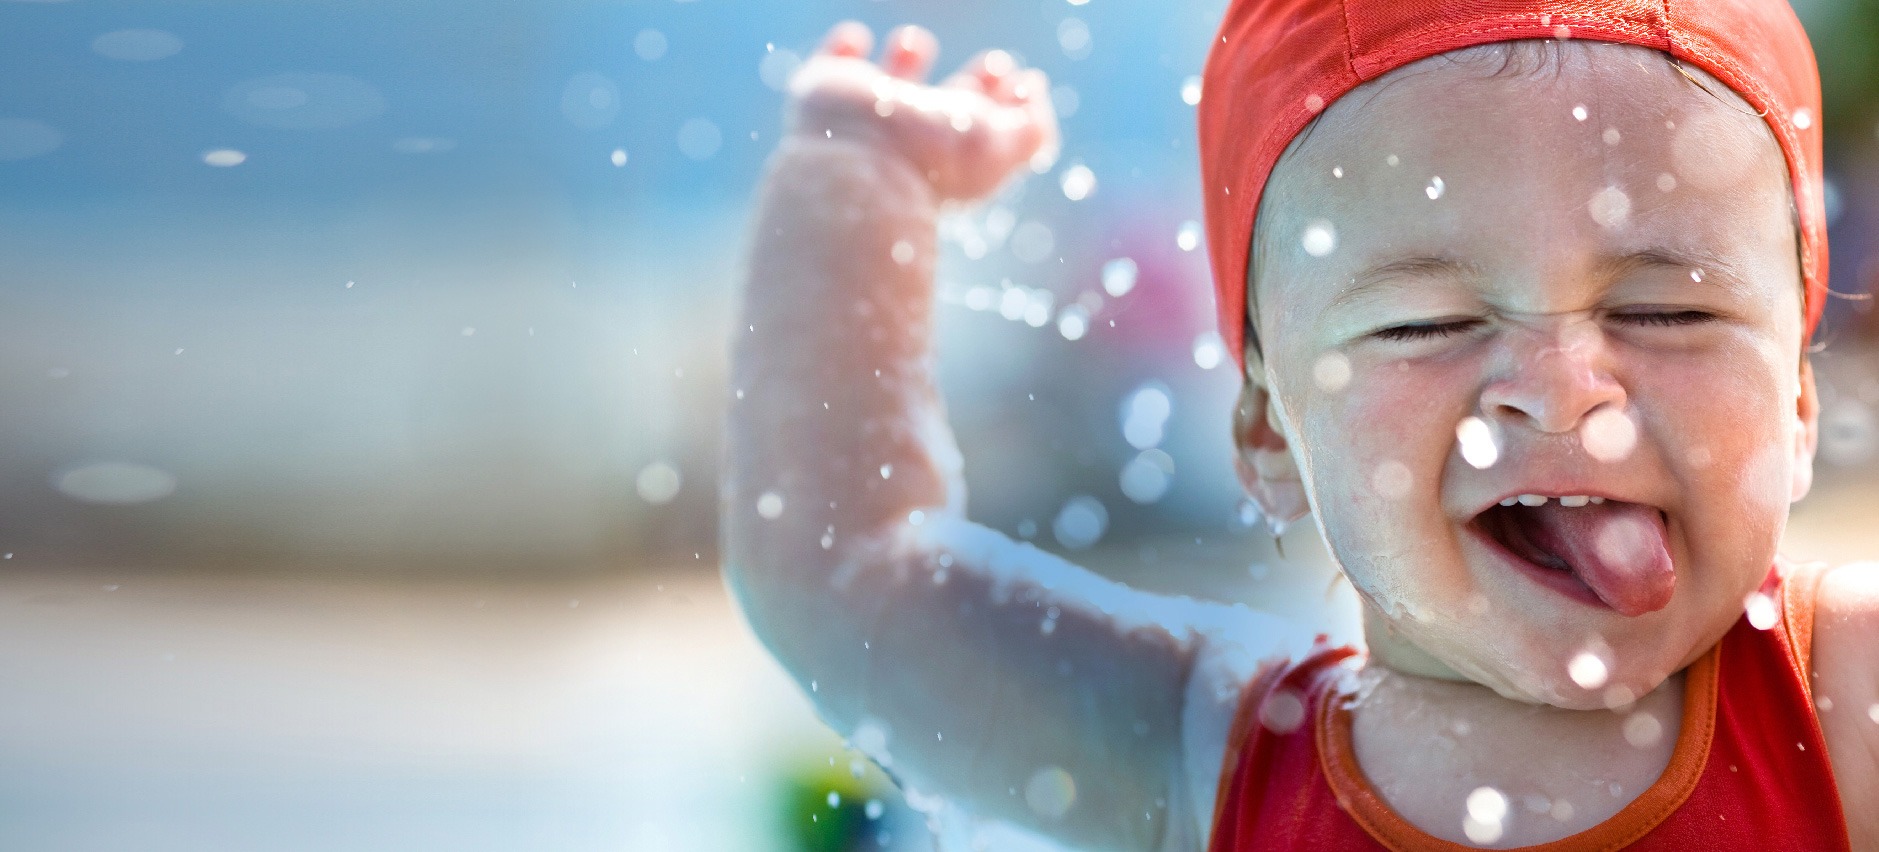 close up of smiling toddler boy with swim suit and cap playing in water